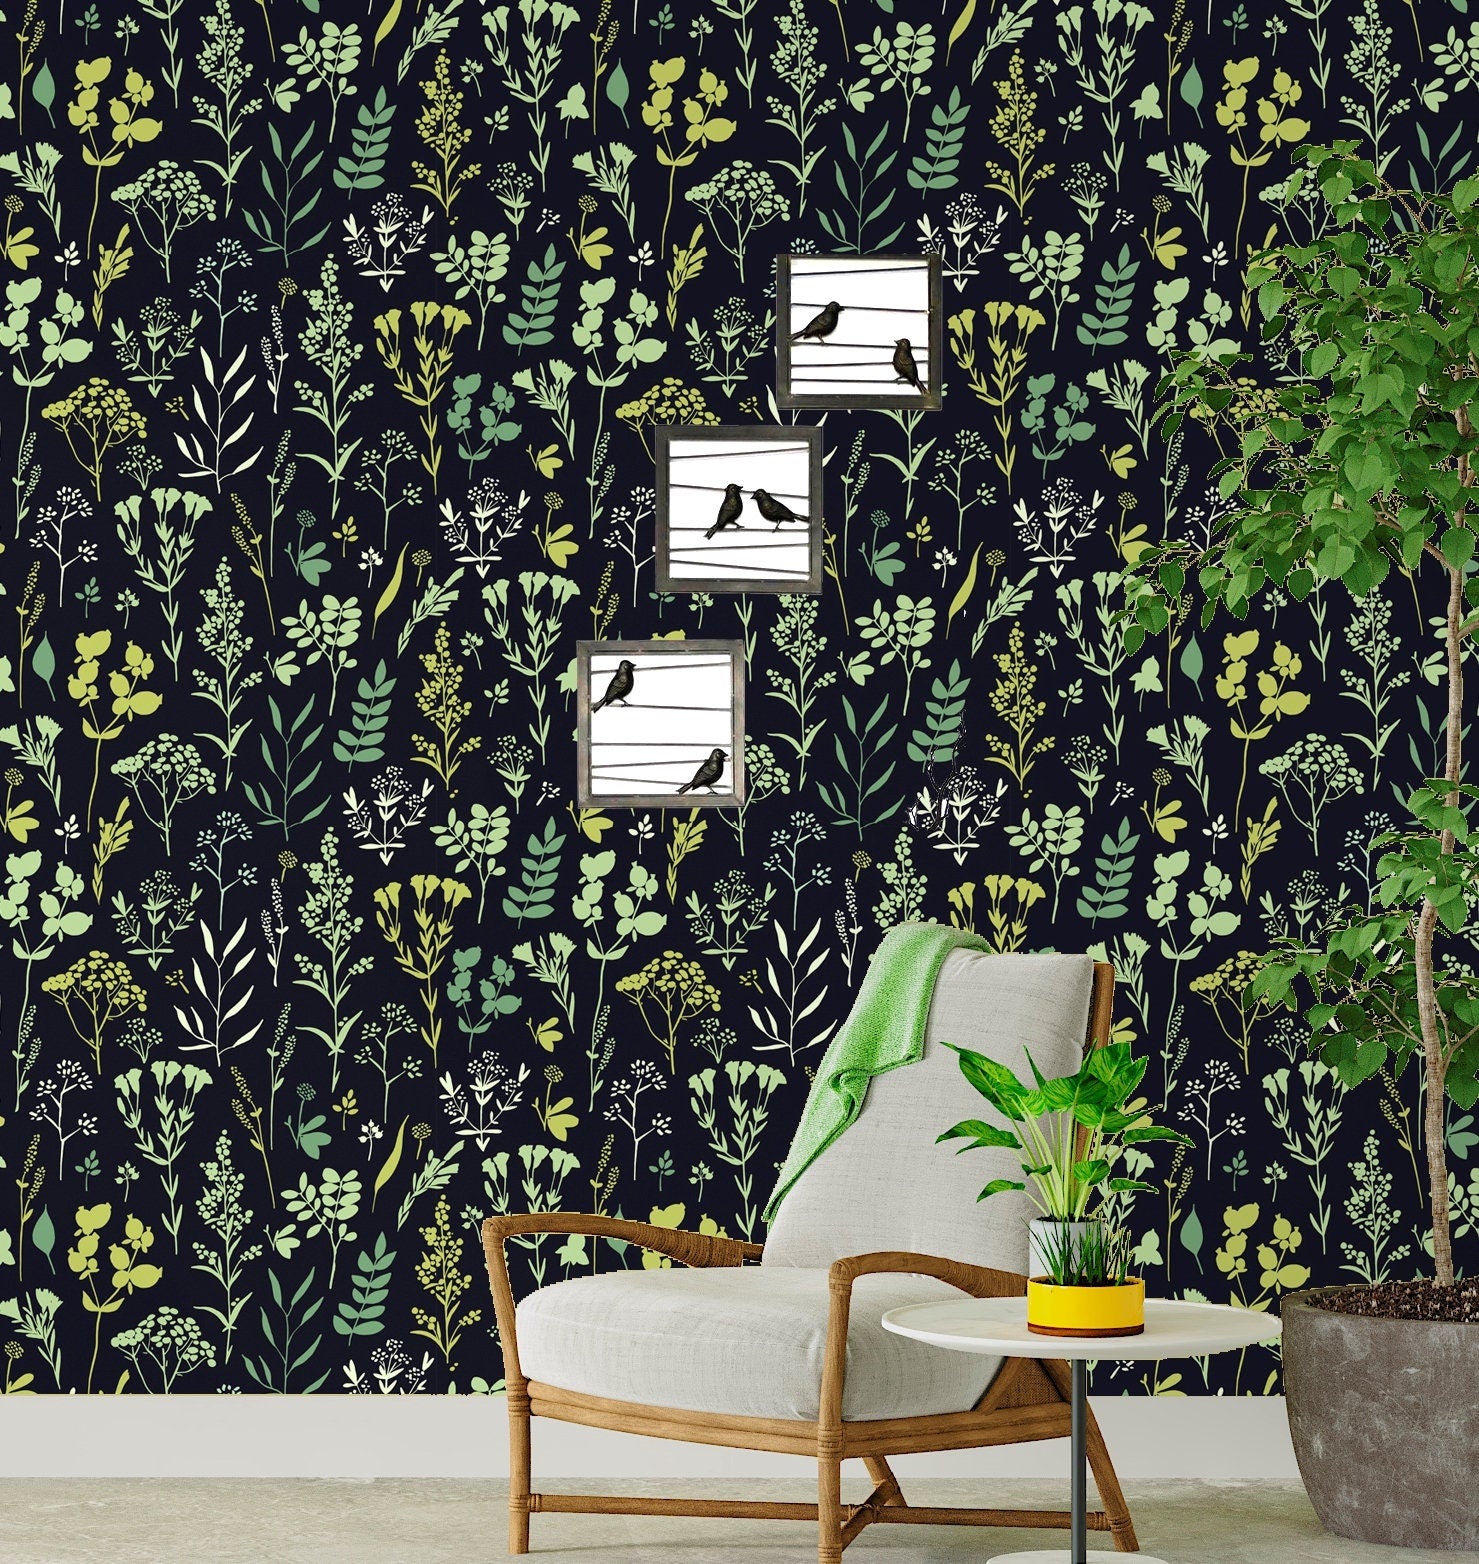 Herbs Wallpaper Peel and Stick, Botanical Wallpaper, Wildflower Wallpaper, Dark Floral Wallpaper, Removable Wall Paper